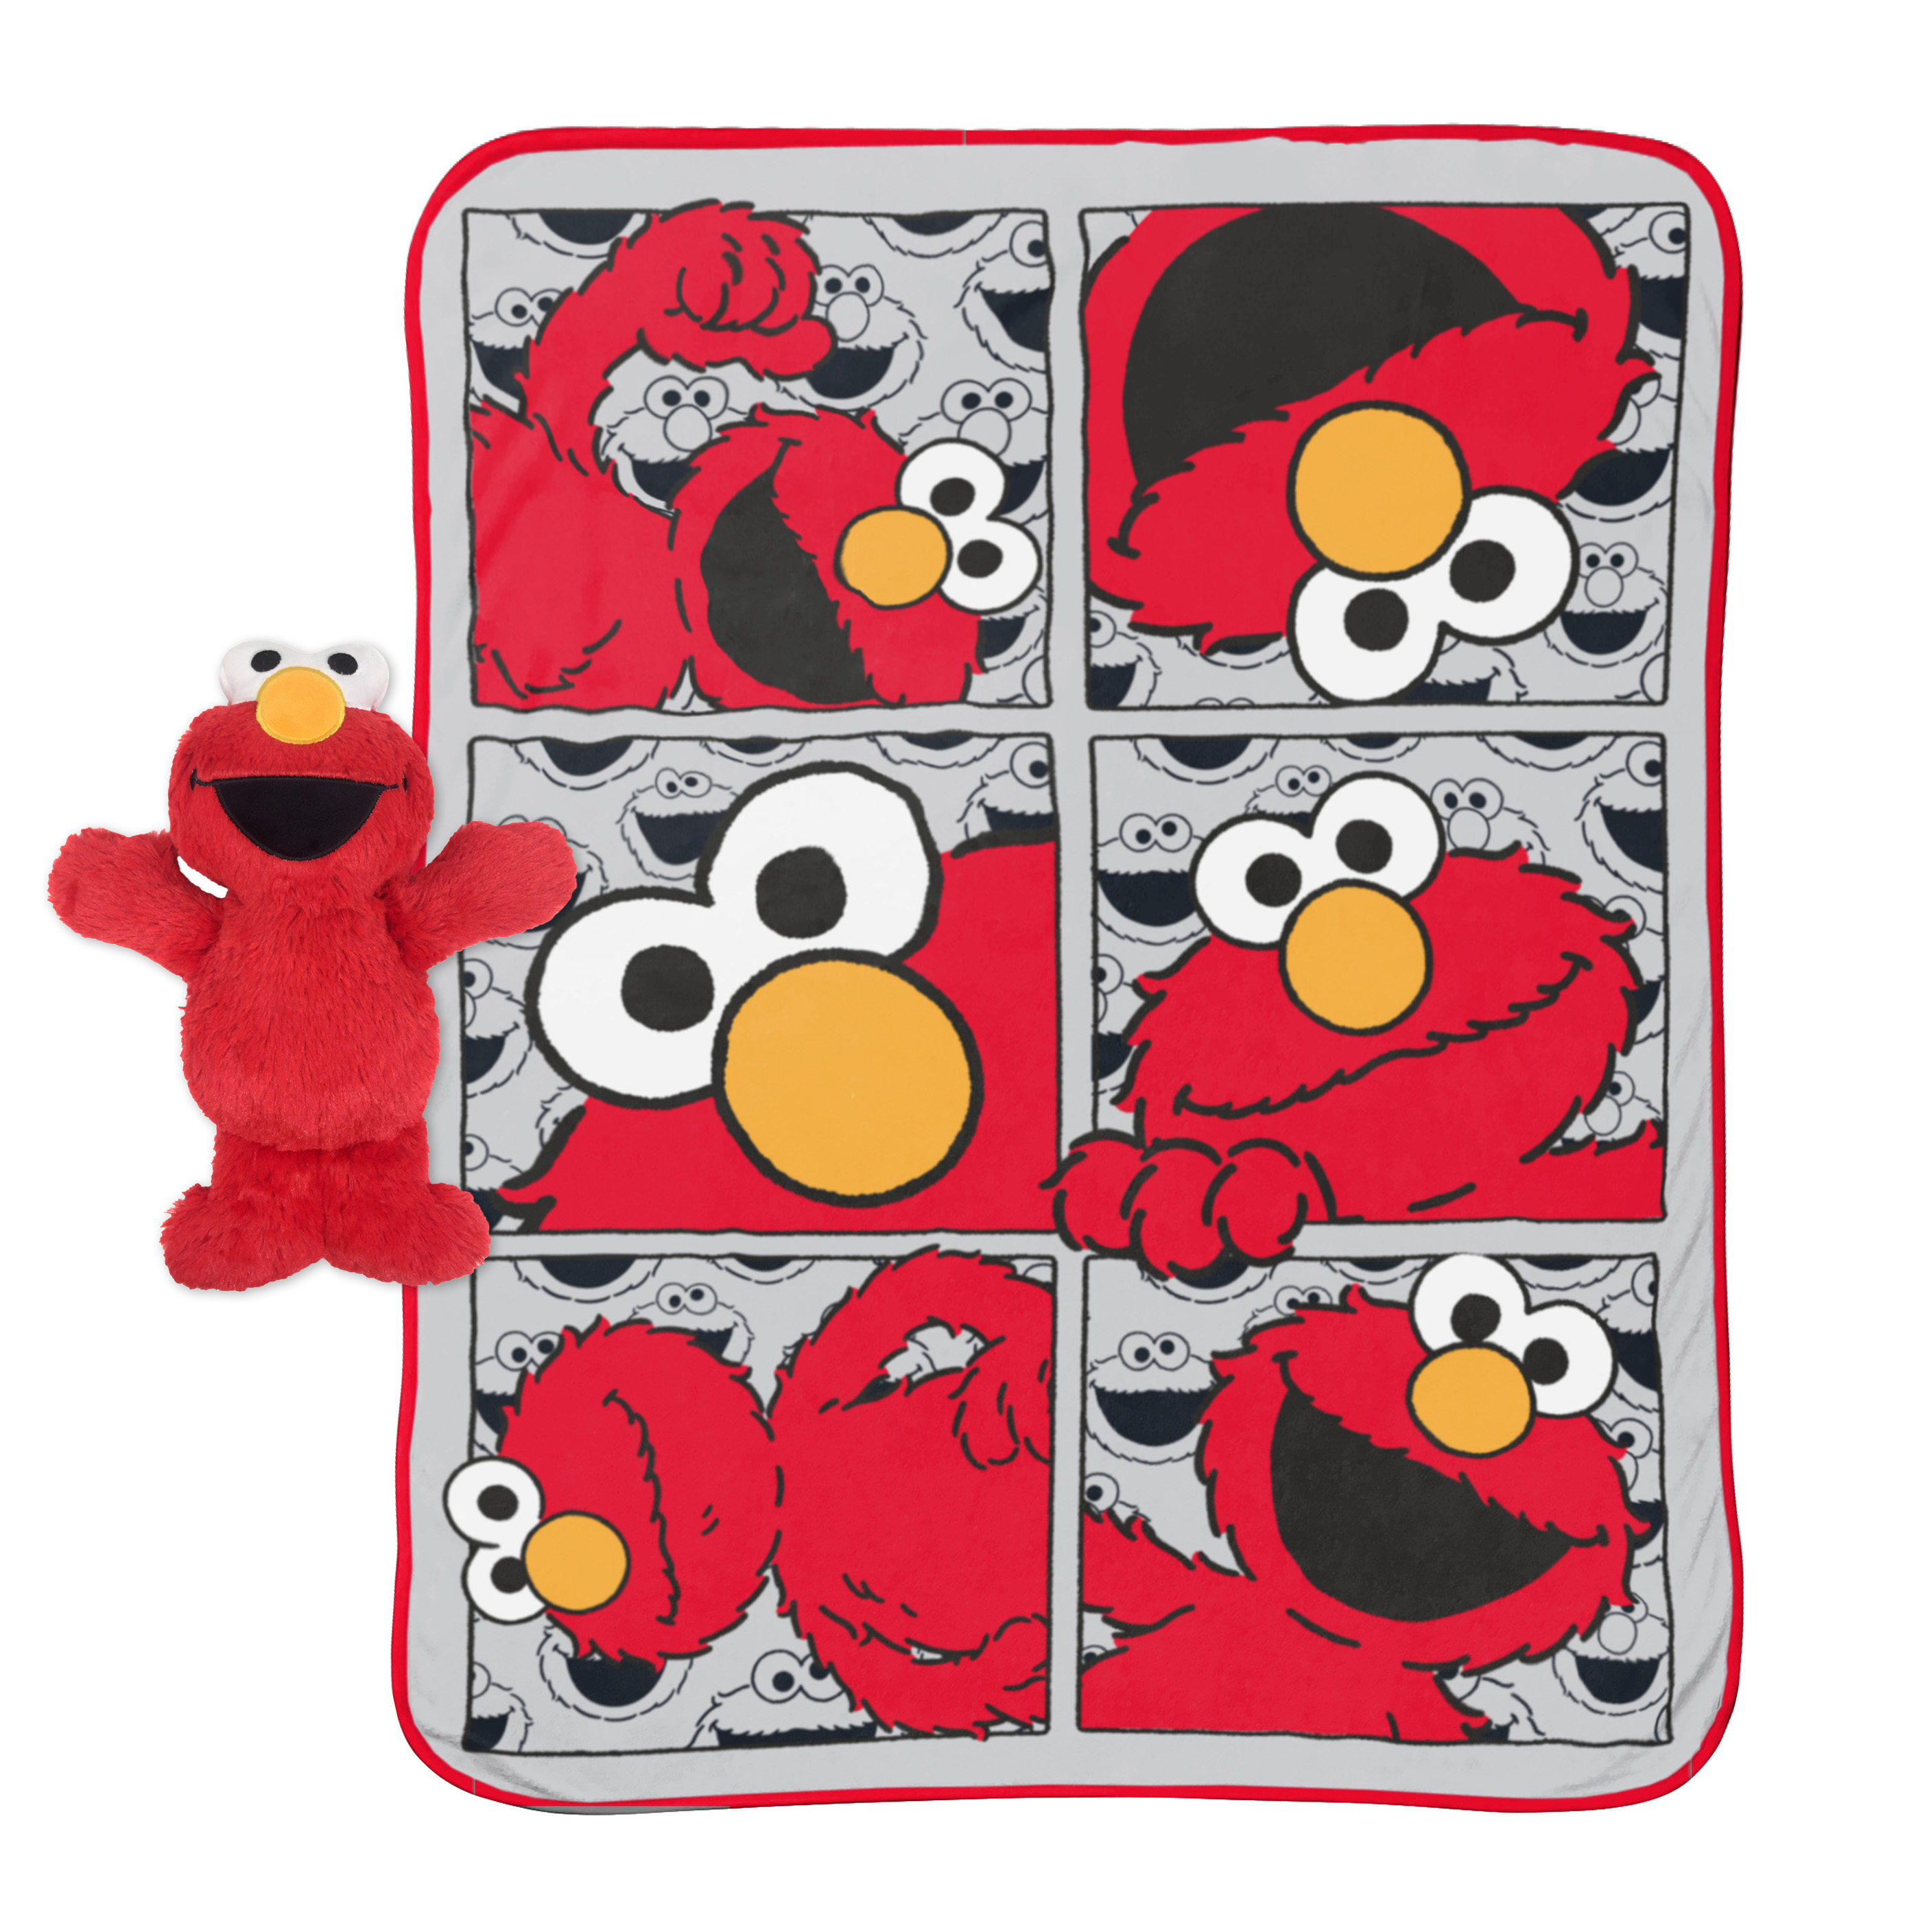 Sesame Street Hip Elmo Pillow Buddy and 40x50 inch Red & Grey Throw Blanket Set, 100% Microfiber - image 1 of 5